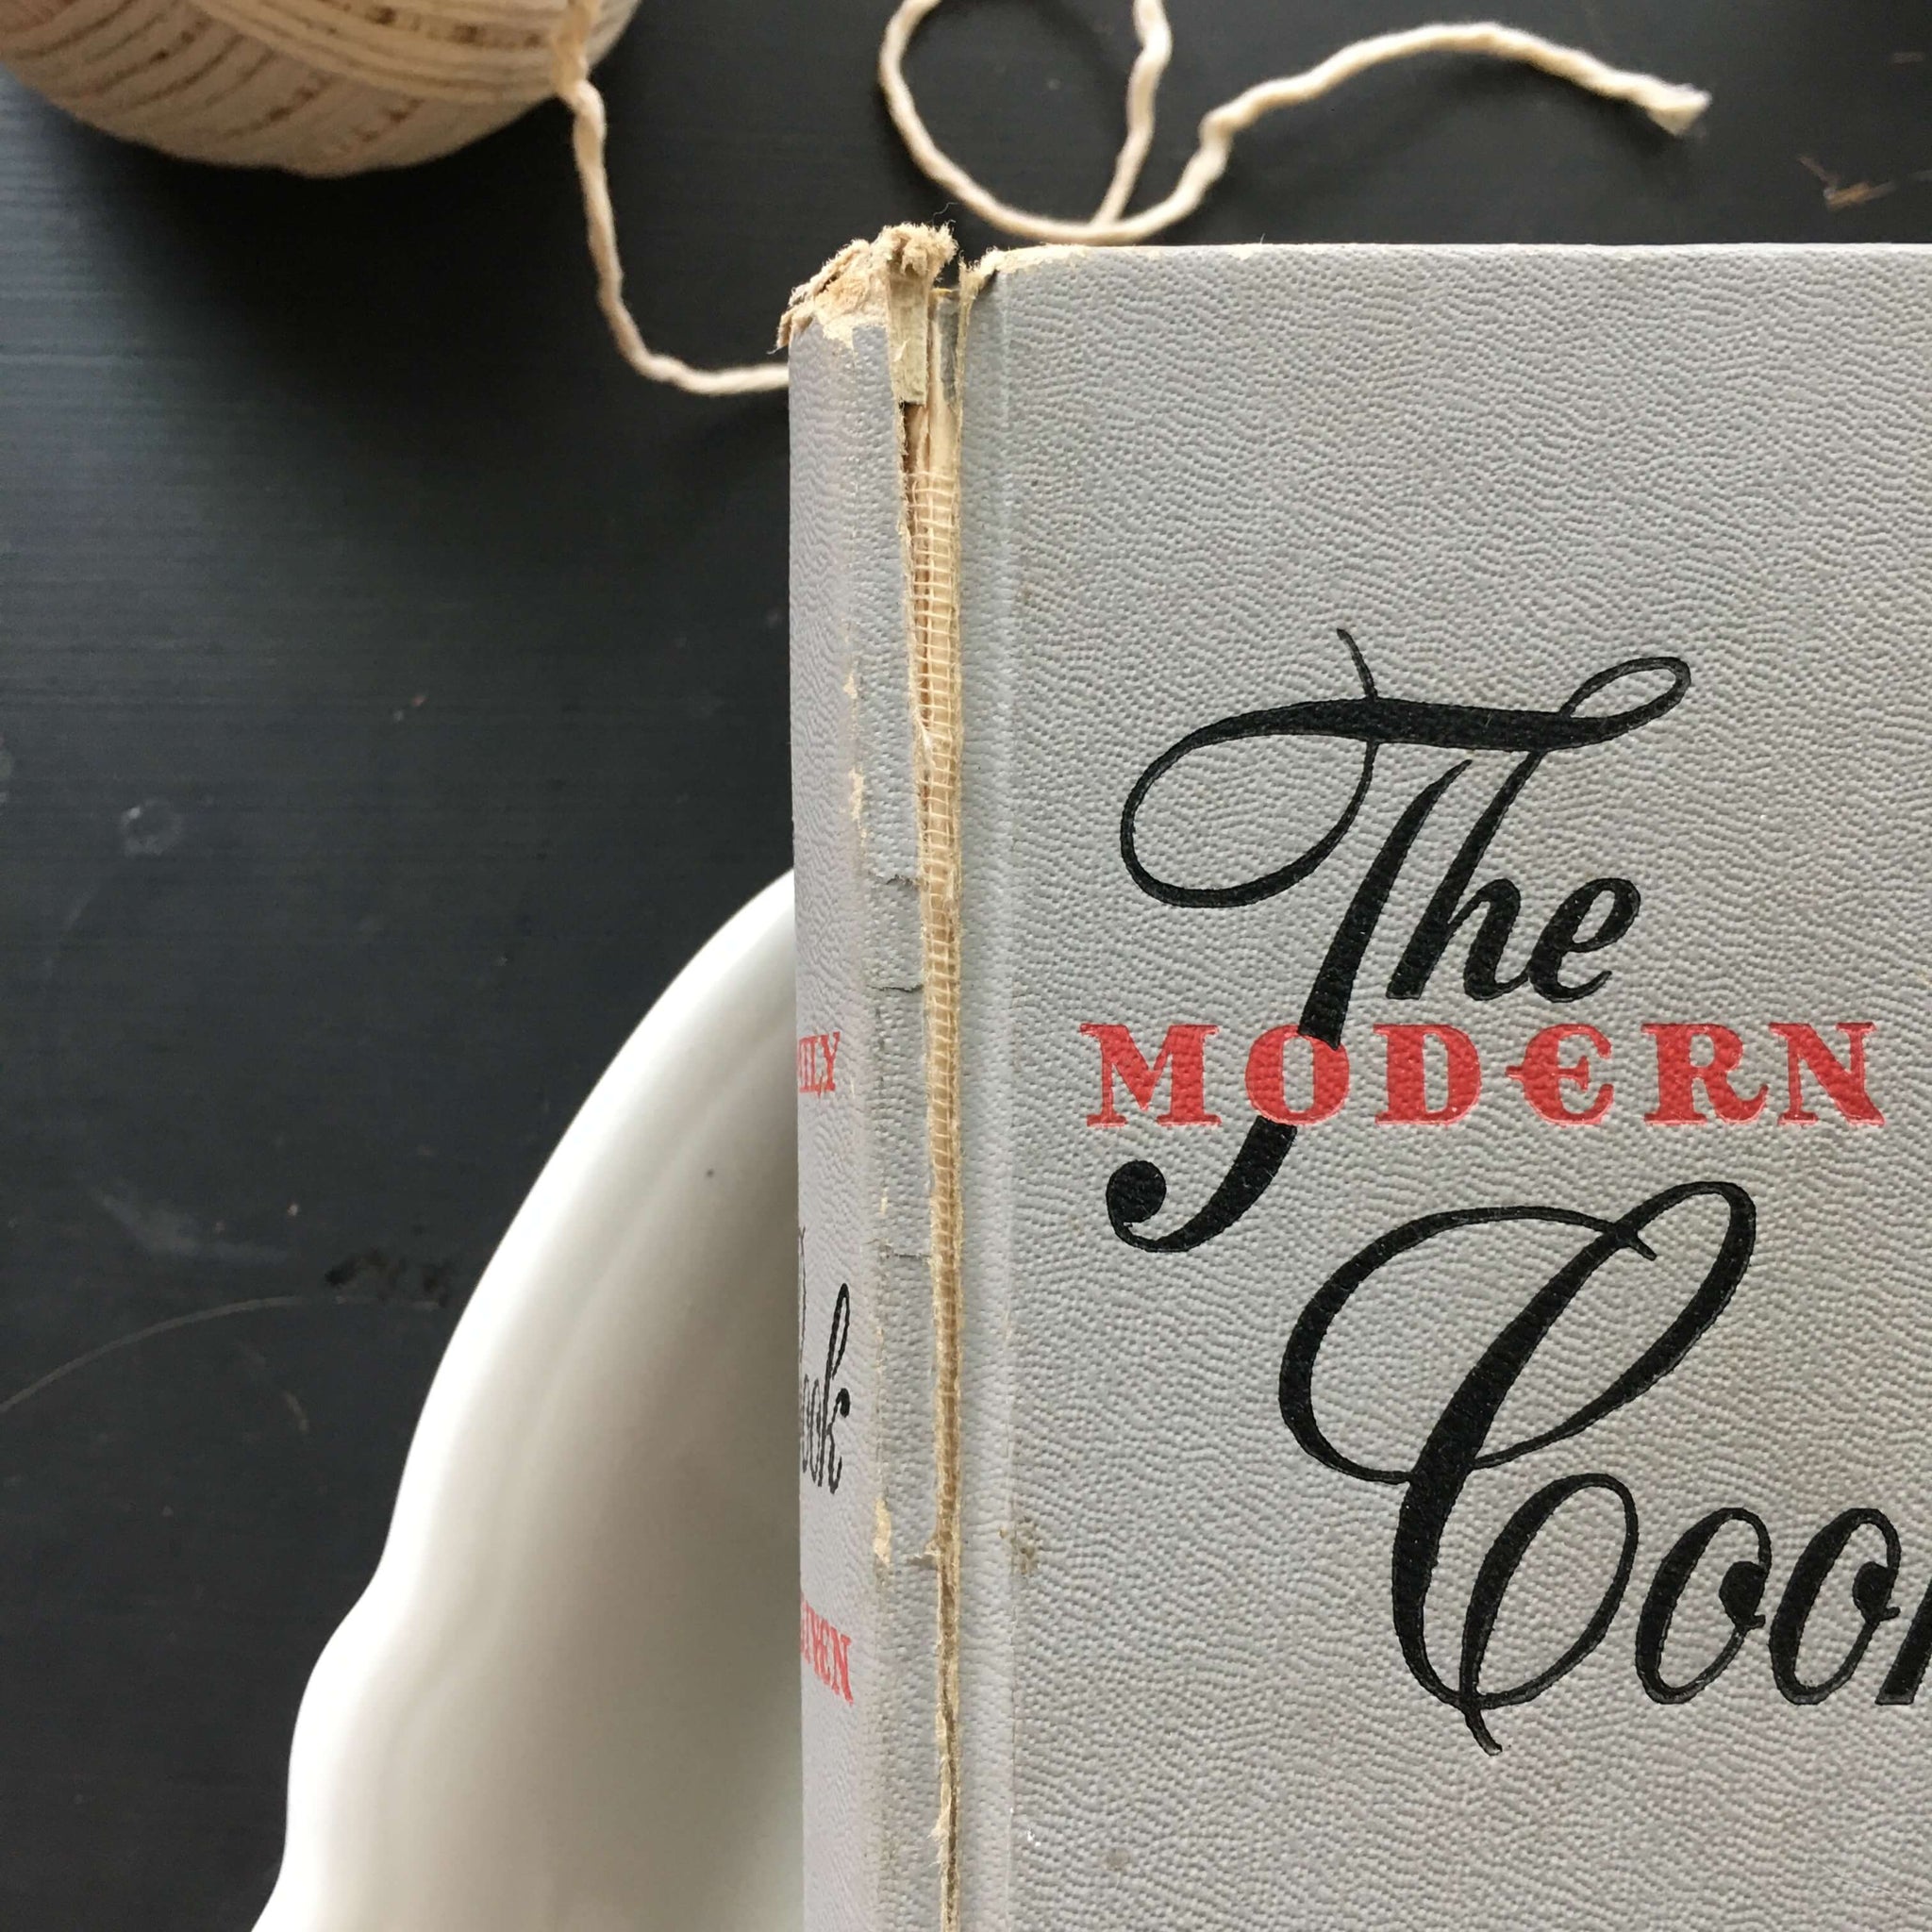 Modern Family Cook Book, Meta Givens, 1961, First Printing.